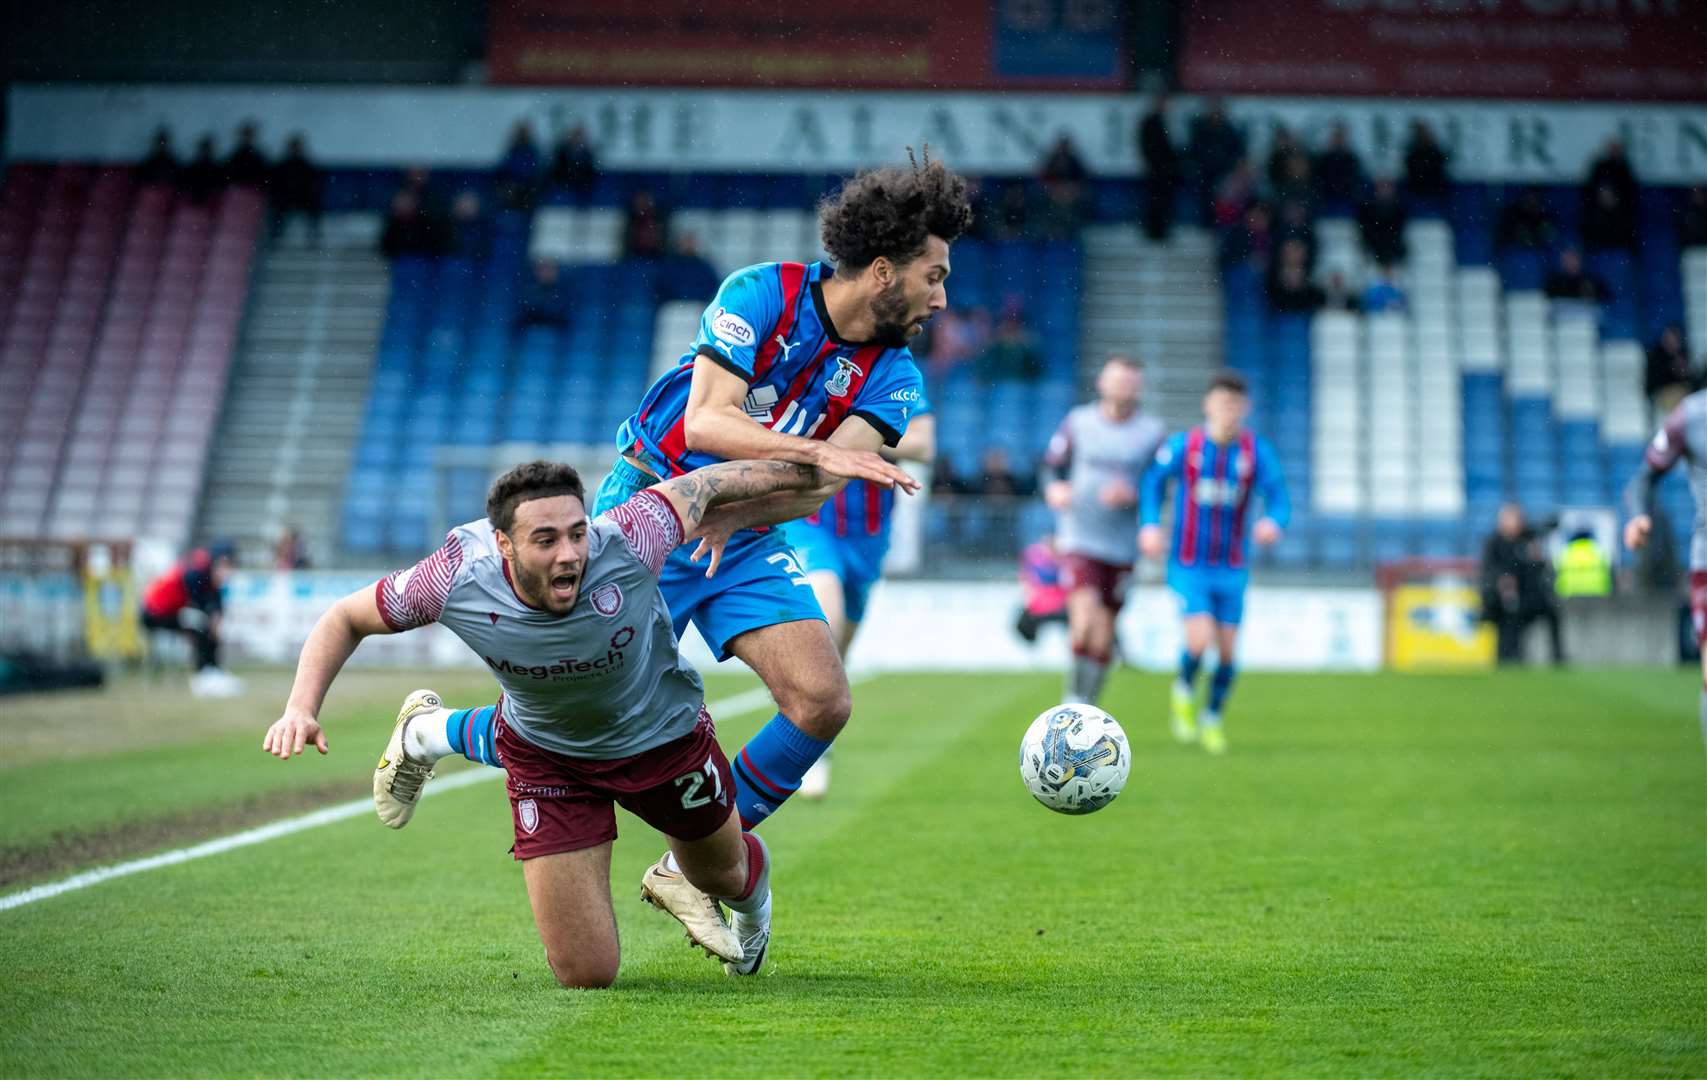 Remi Savage in action for Inverness against Arbroath. Picture: Callum Mackay.